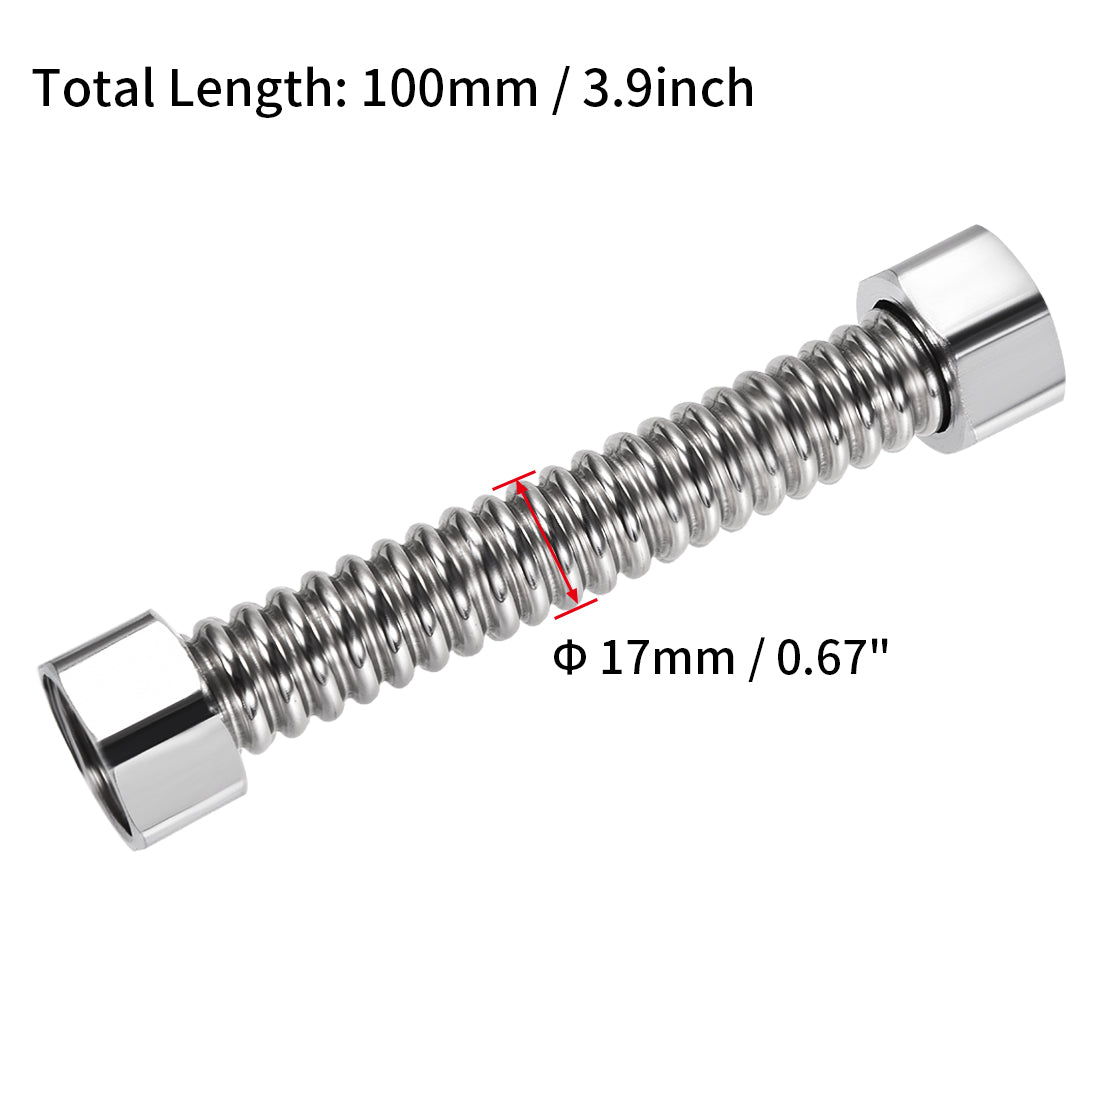 uxcell Uxcell Corrugated Stainless Steel Flexible Water Line 3.9inch Long G1/2 Female Threaded Connector with Washer , 4pcs